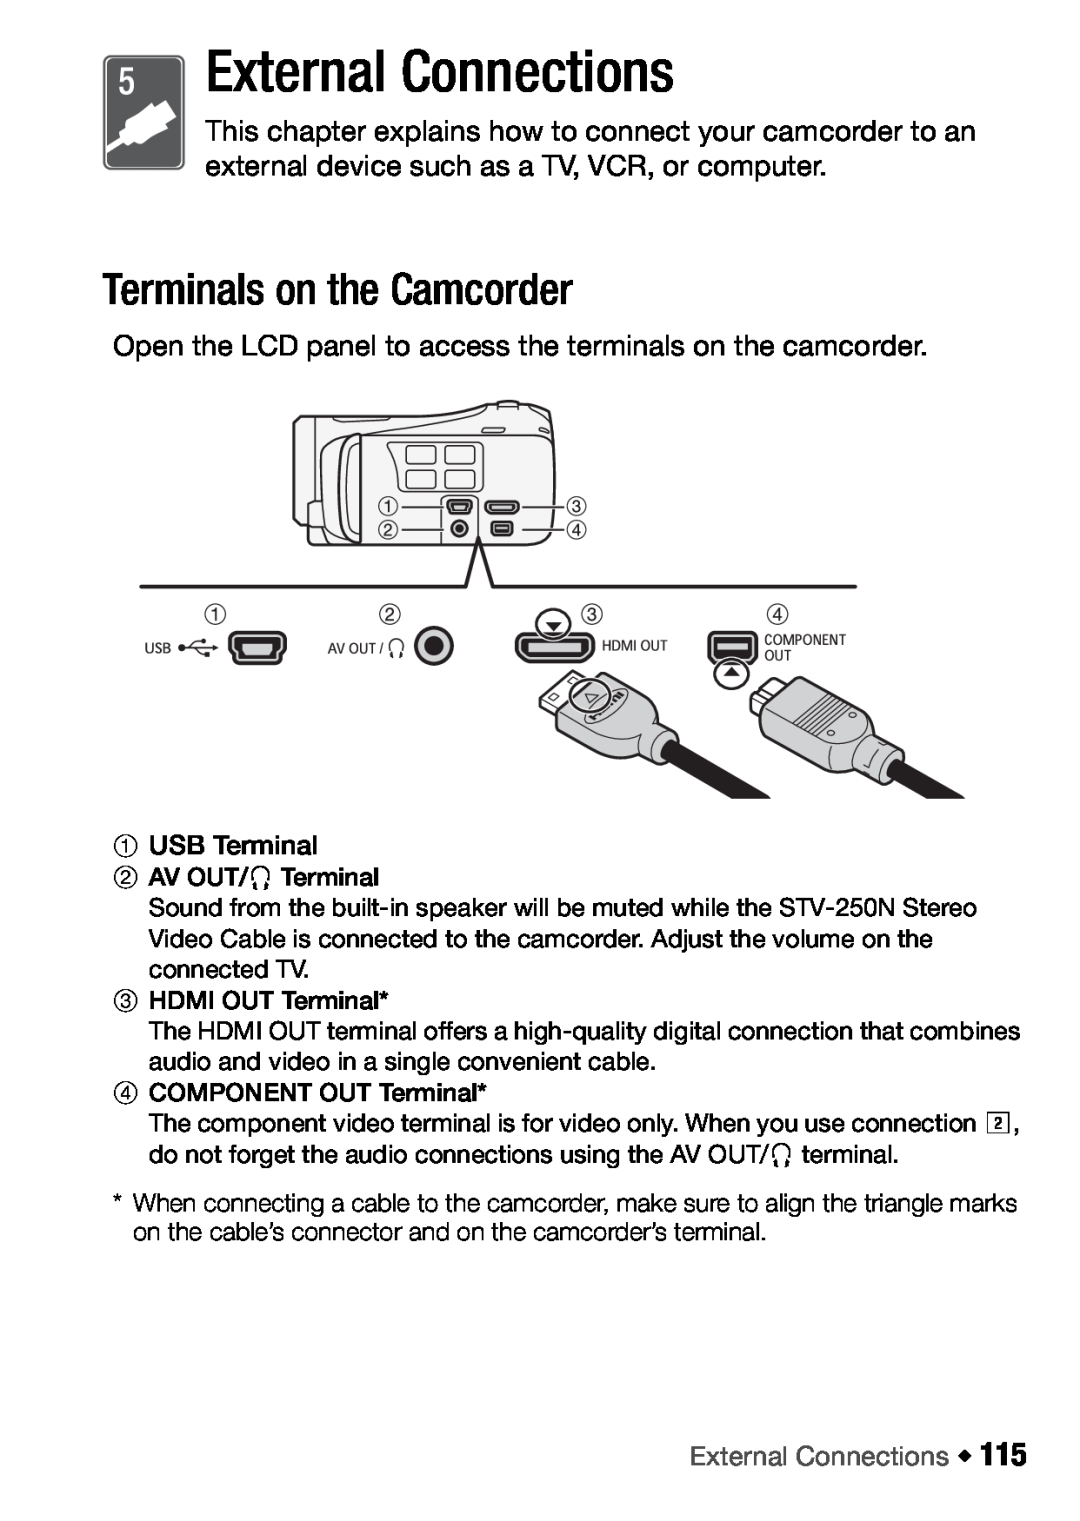 Canon HFM46, HFM406 instruction manual Terminals on the Camcorder, USB Terminal, External Connections Š 